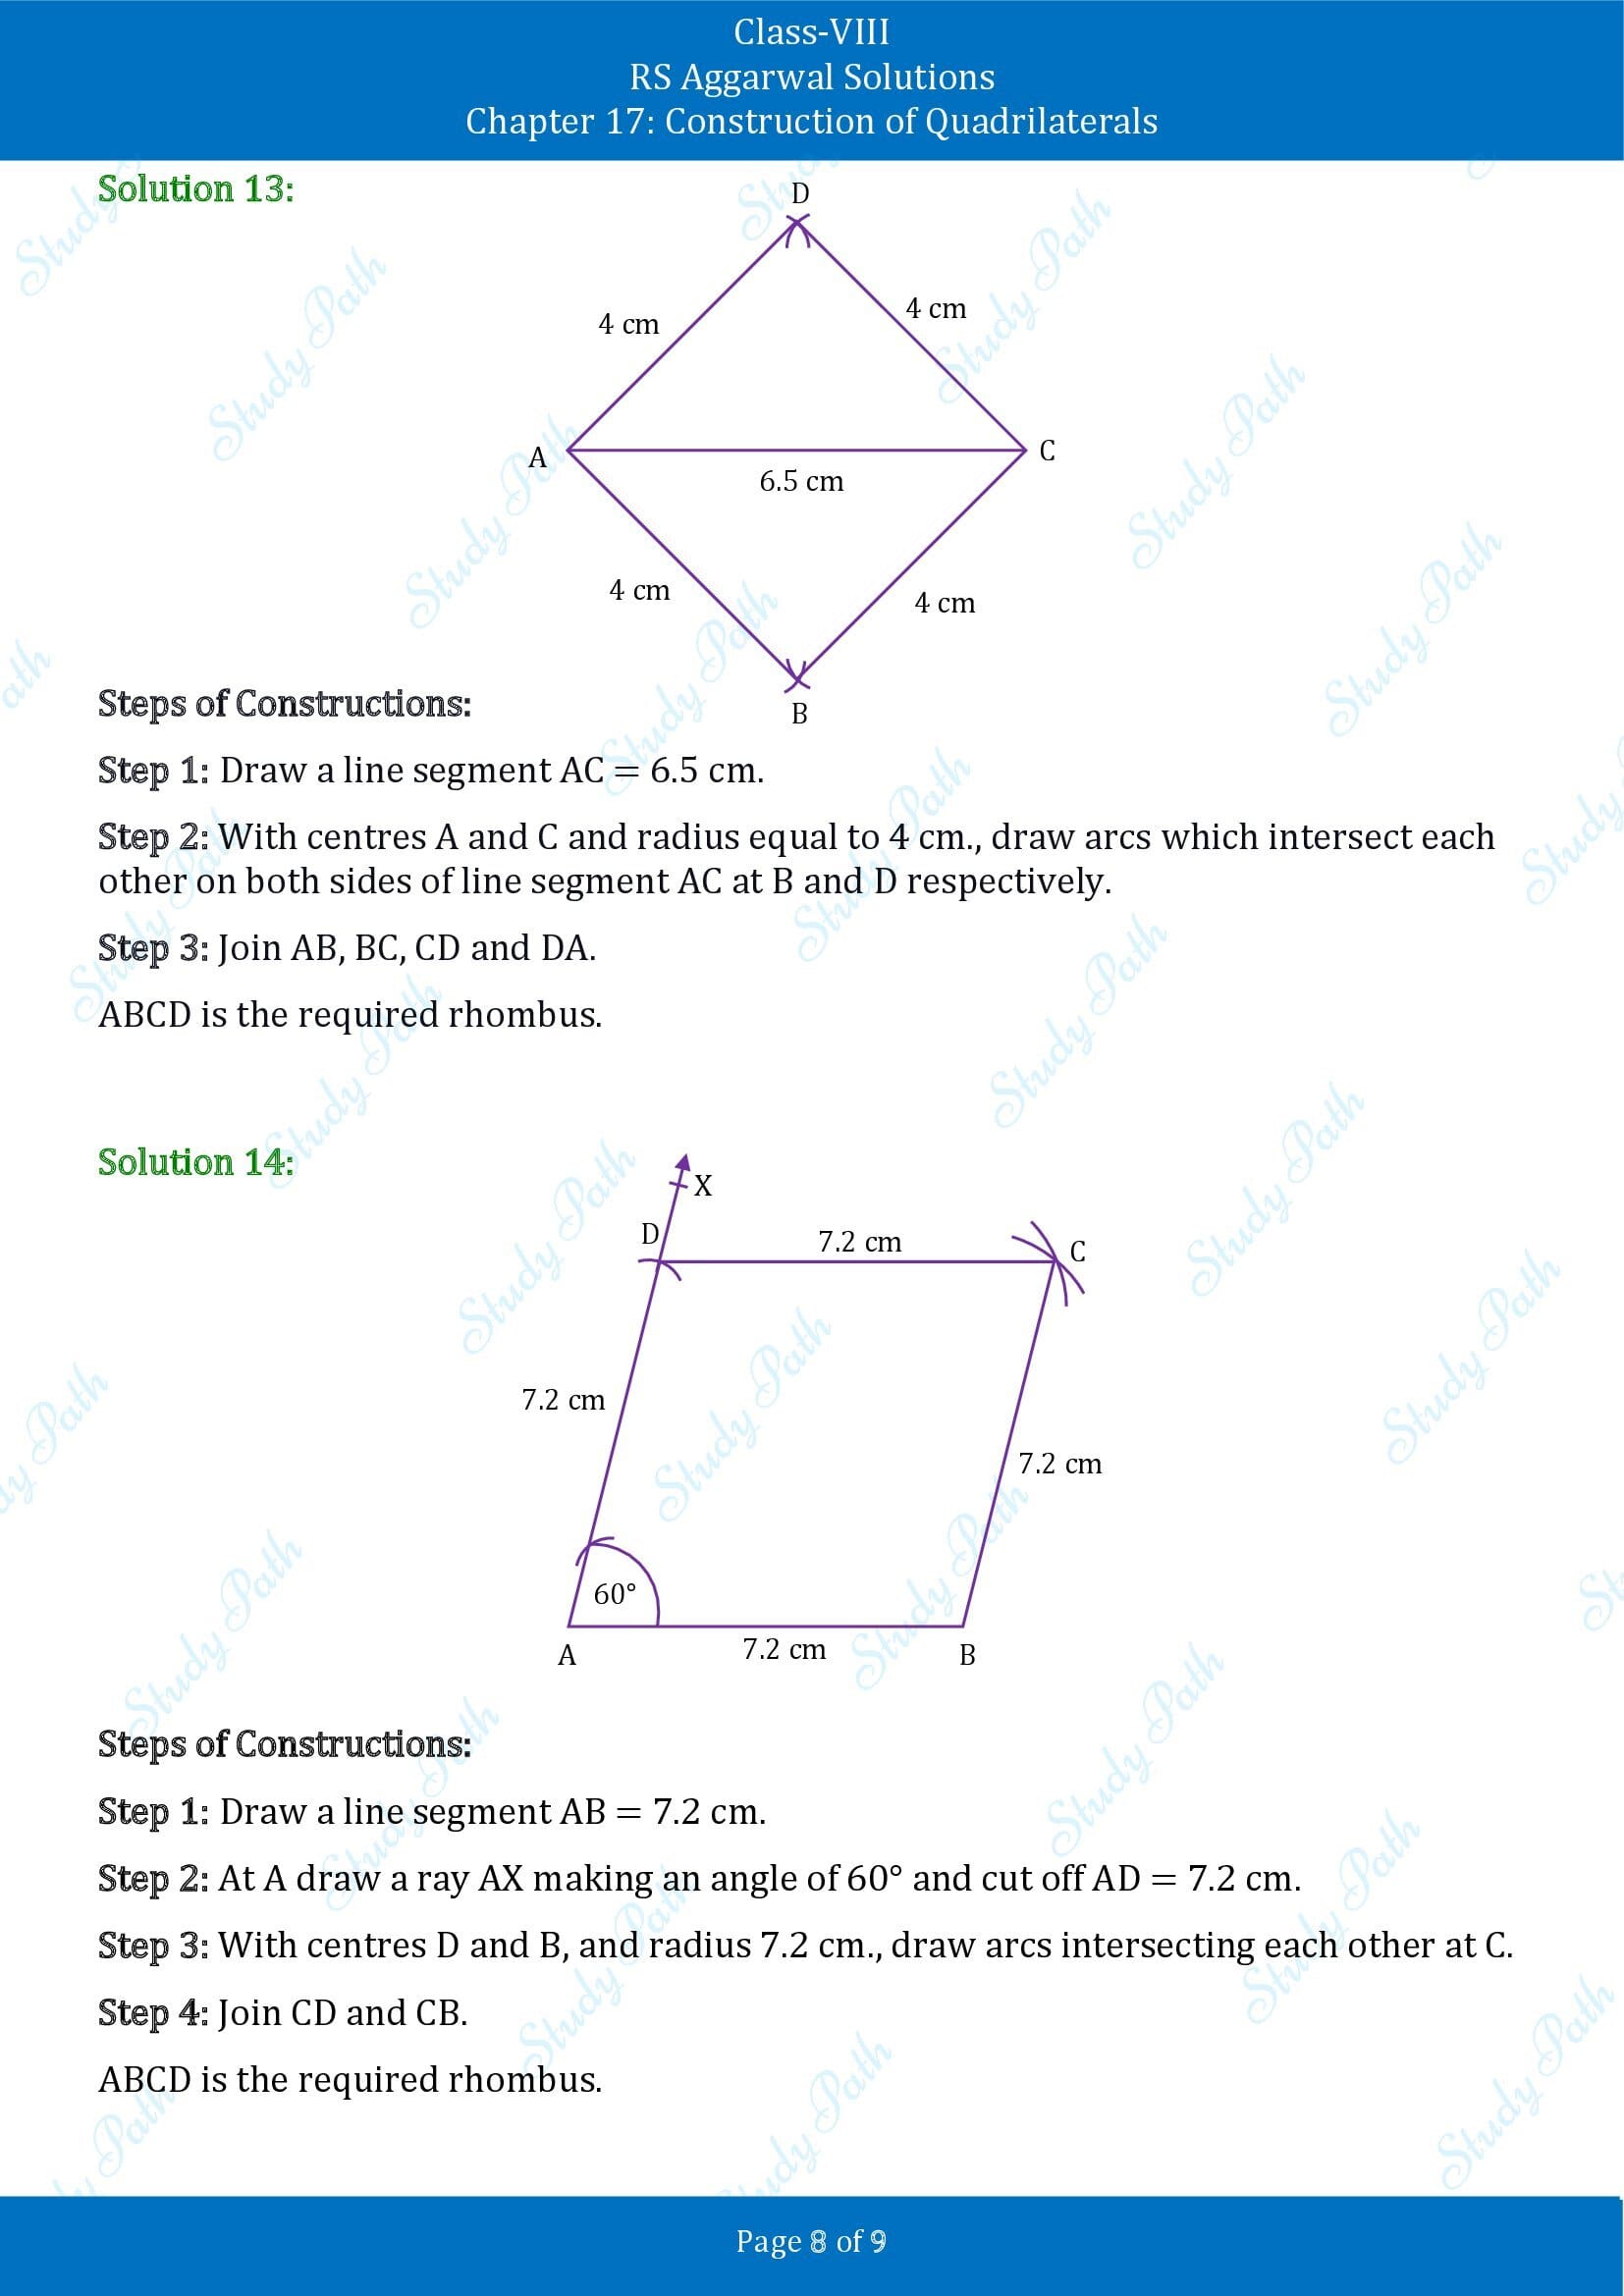 RS Aggarwal Solutions Class 8 Chapter 17 Construction of Quadrilaterals Exercise 17B 00008